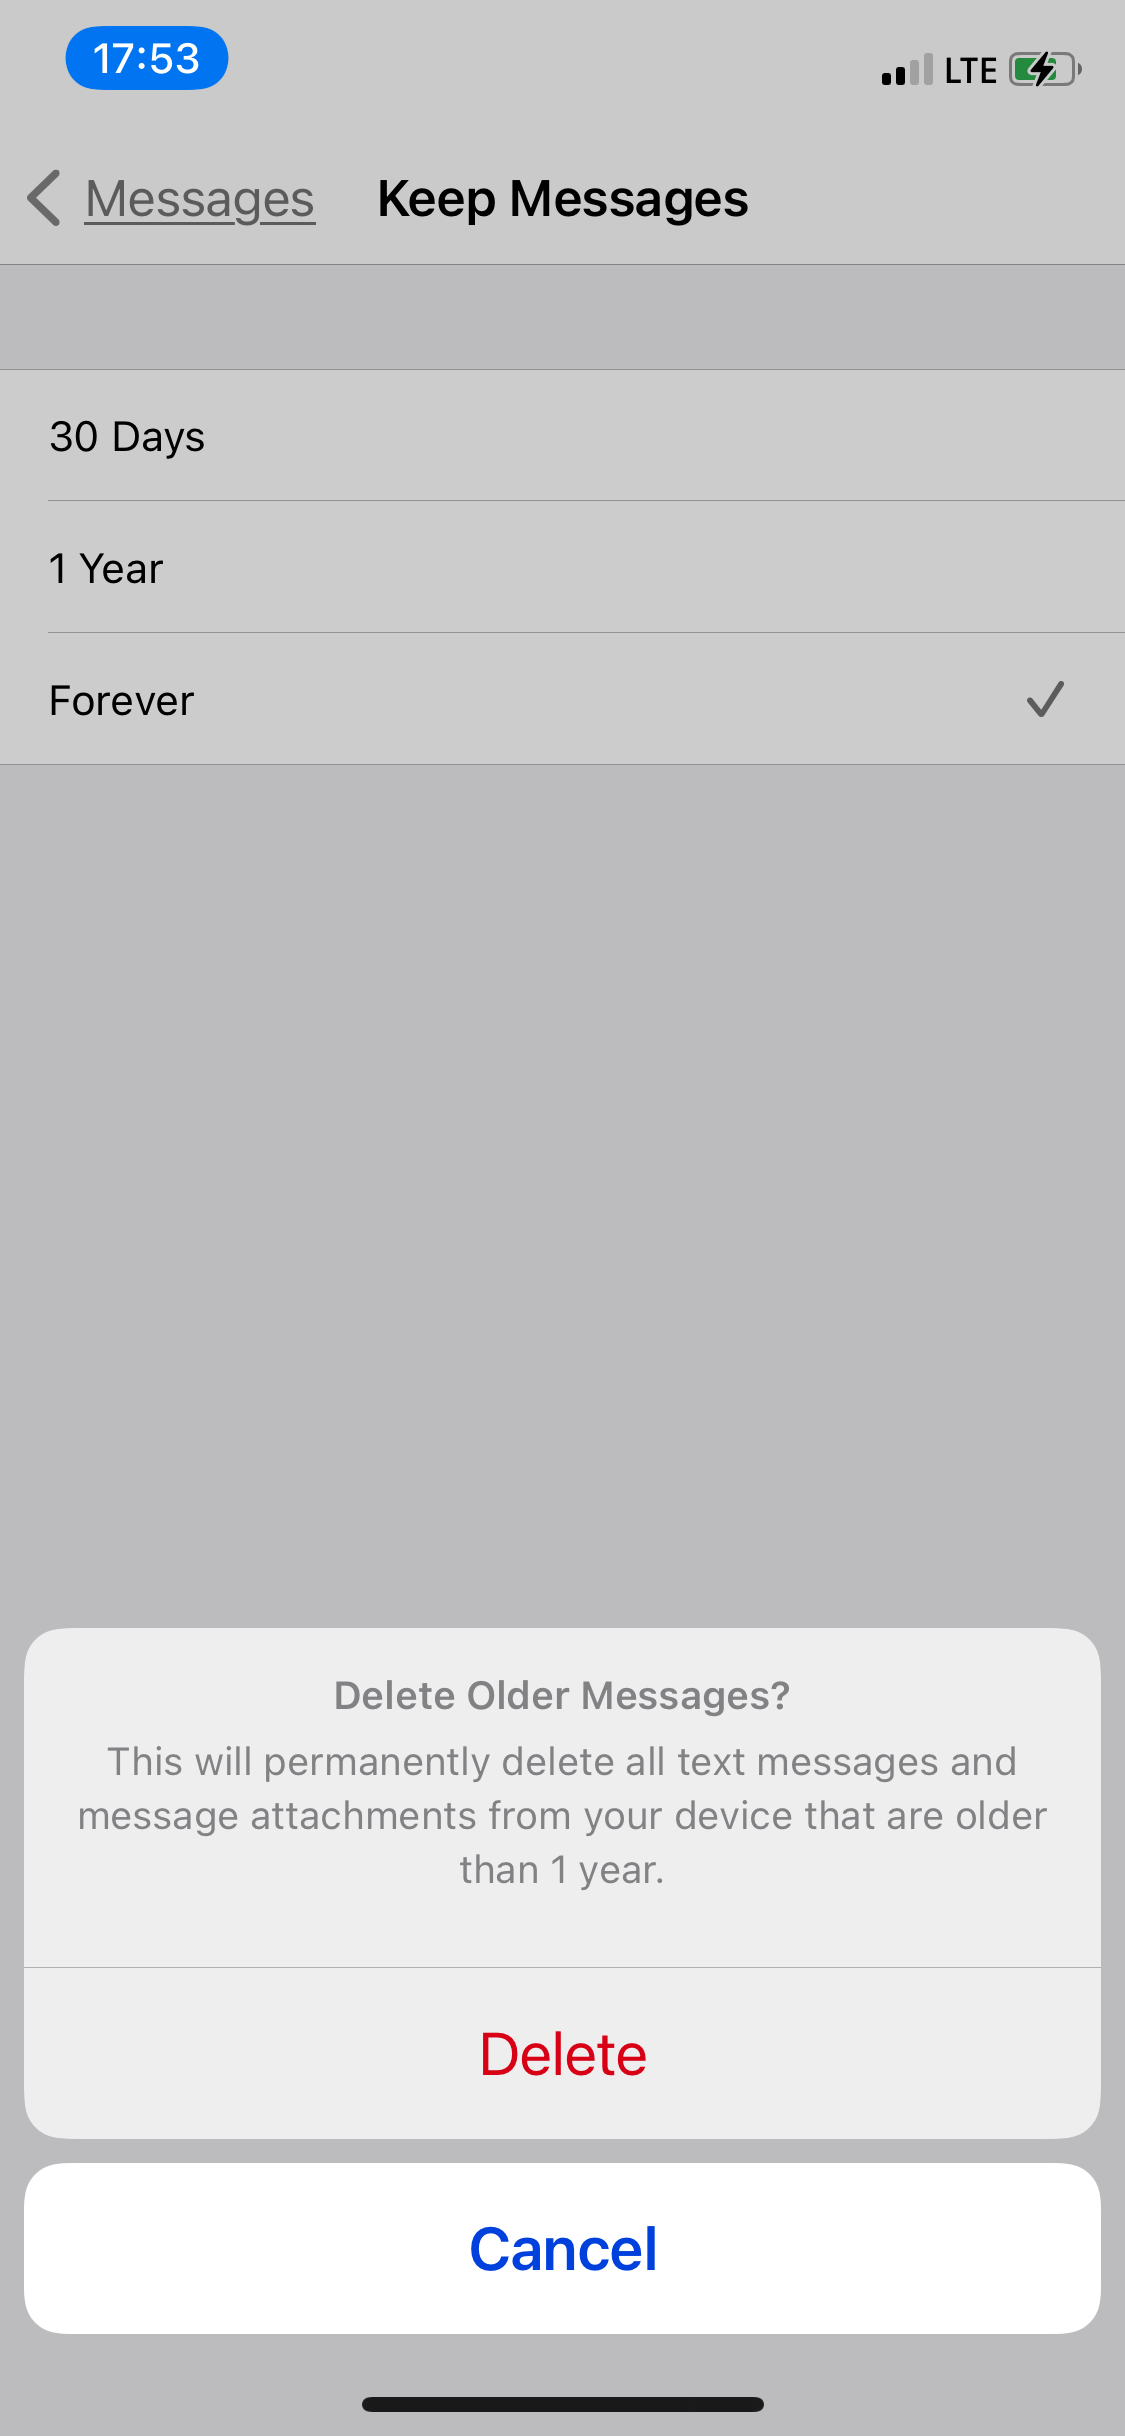 iPhone Message settings screenshot with Delete Older Messages prompt.